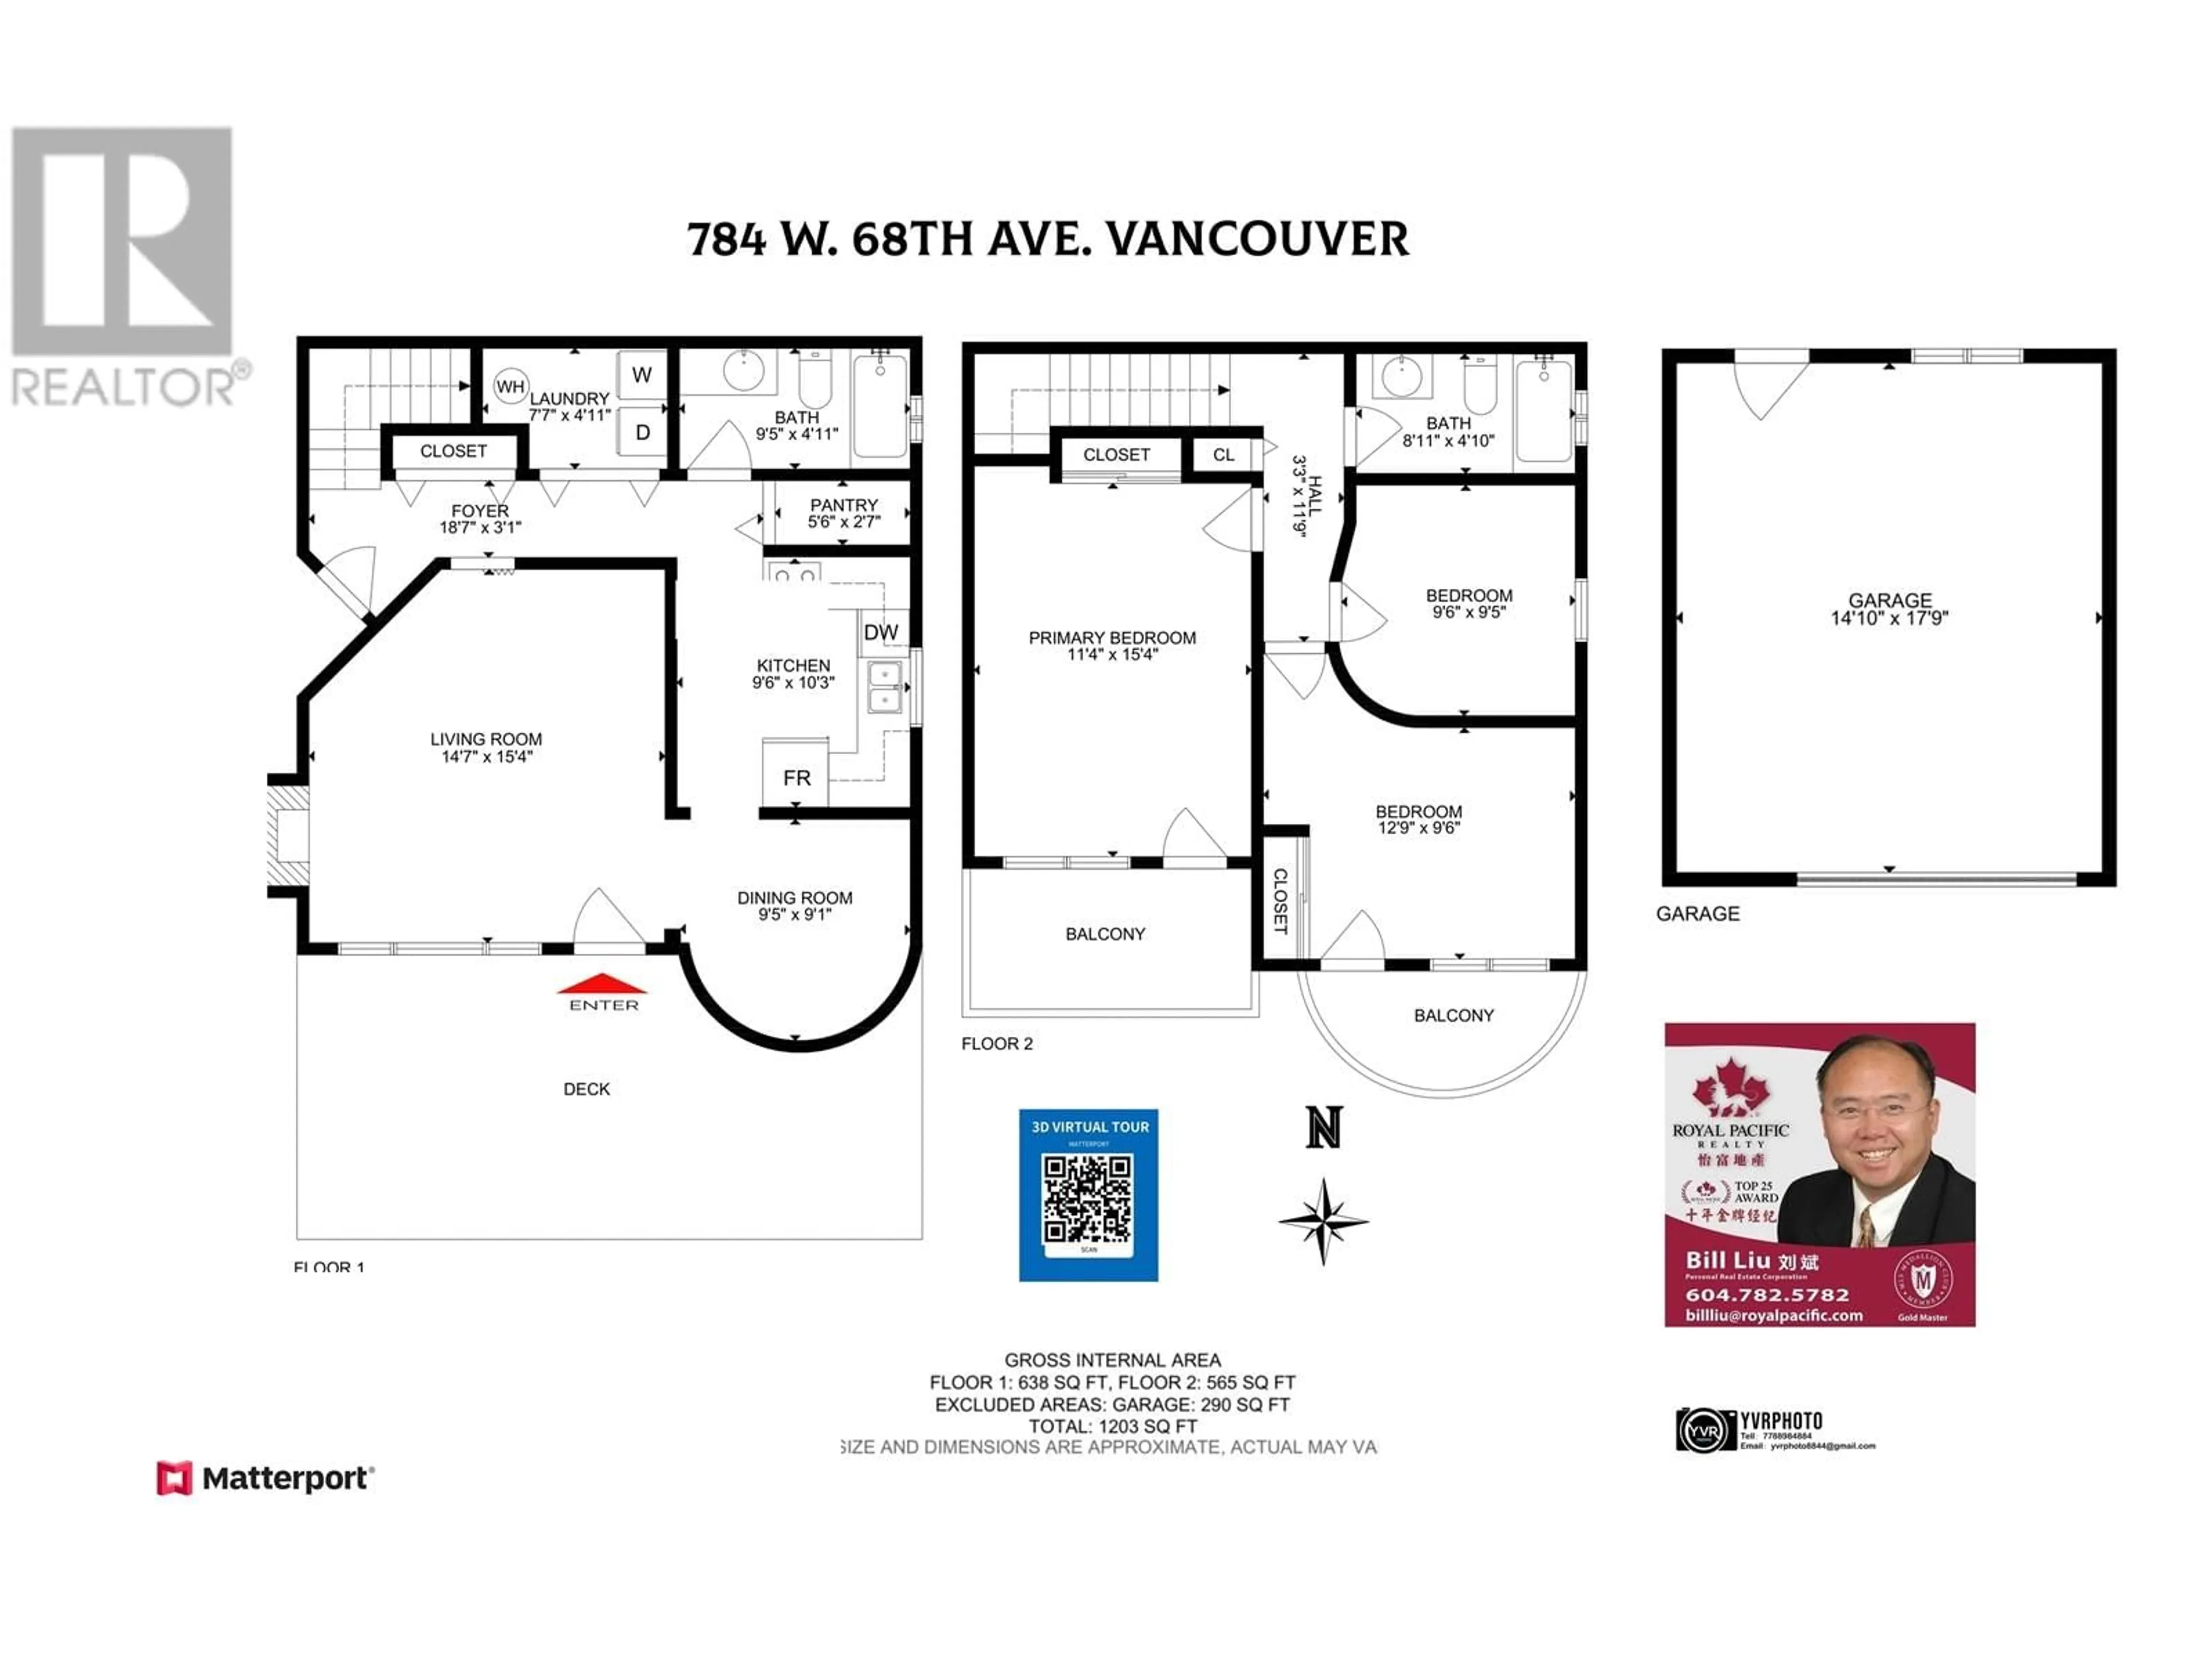 Floor plan for 784 W 68TH AVENUE, Vancouver British Columbia V6P2T9